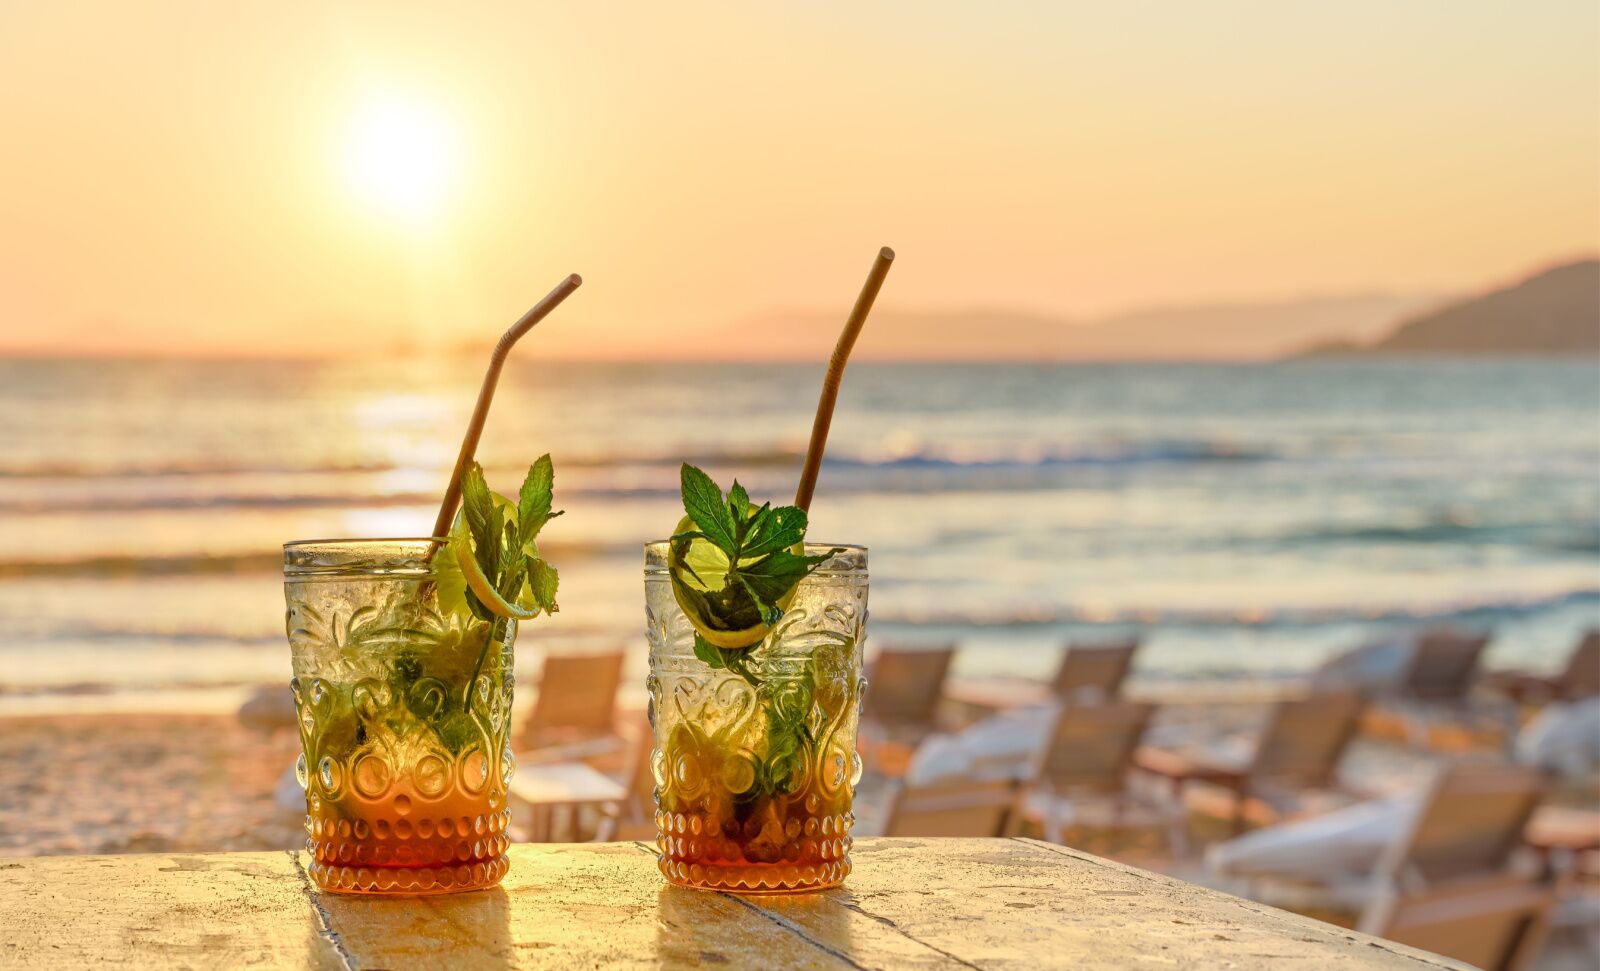 Cocktails on the beach are best saved for after the destination marathons